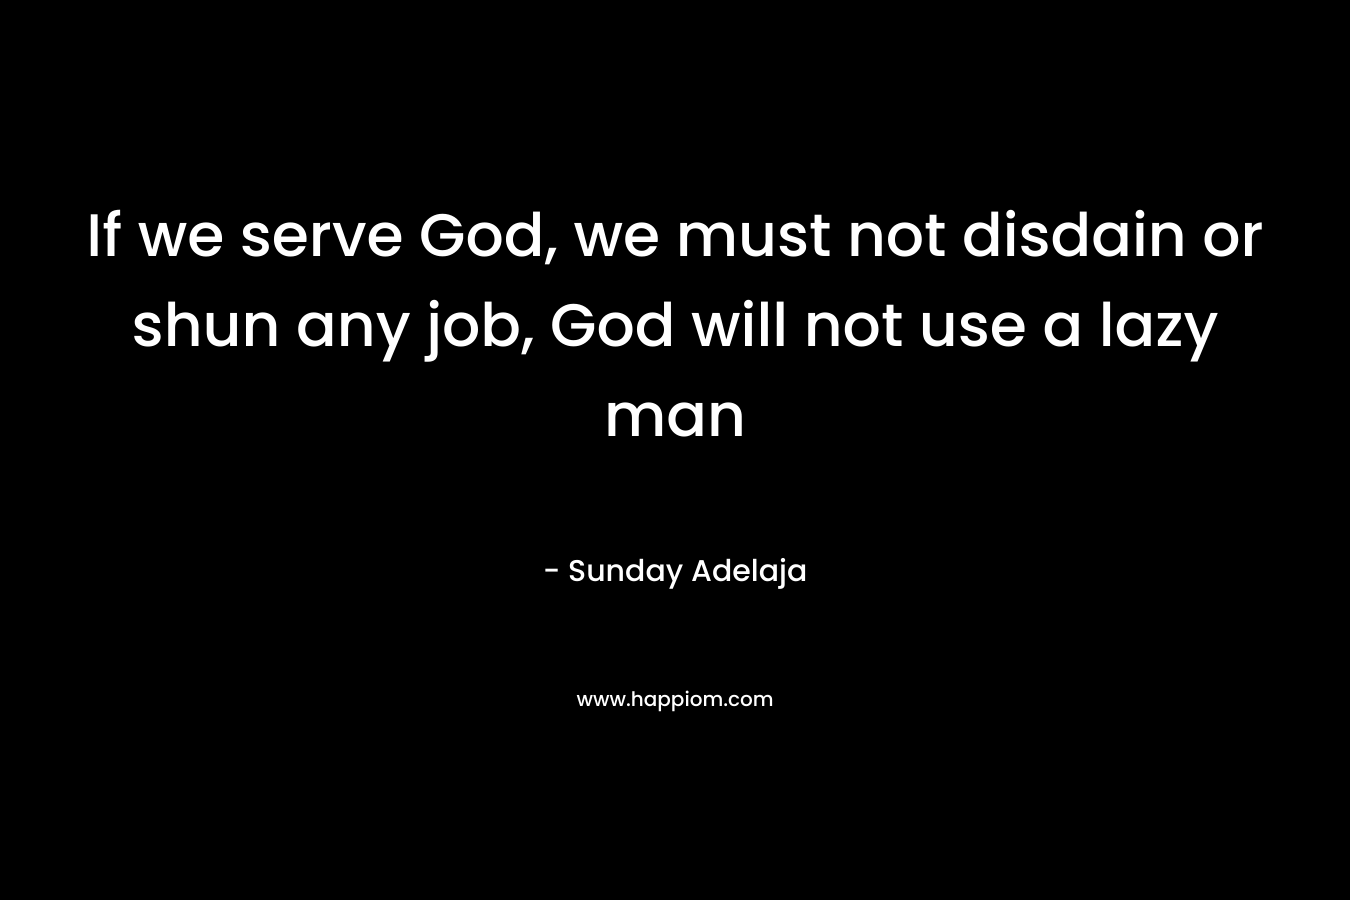 If we serve God, we must not disdain or shun any job, God will not use a lazy man